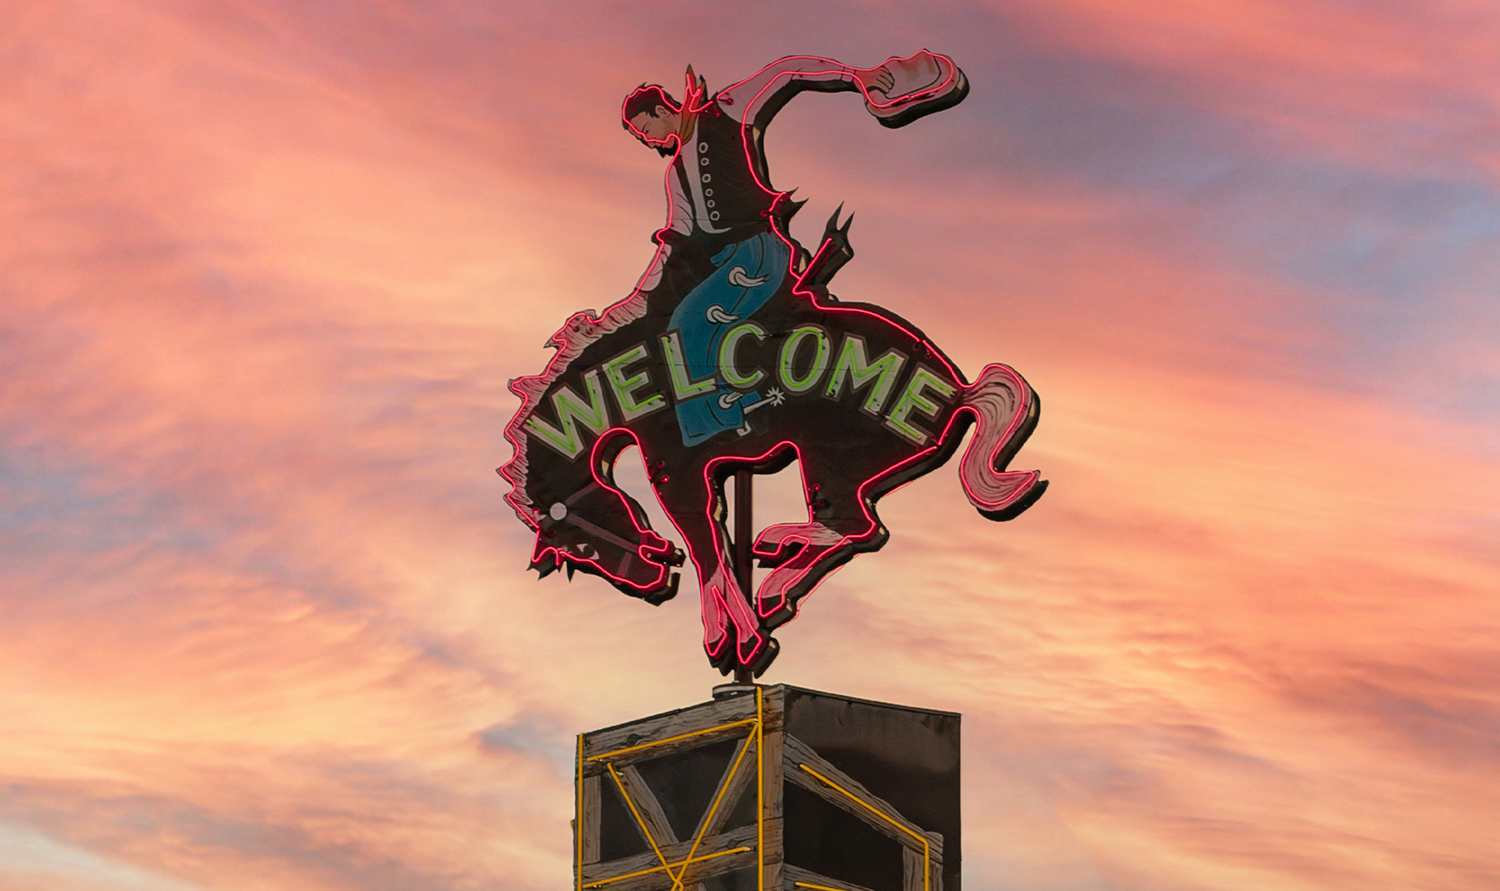 Illuminated Welcome Sign of a Cowboy Riding a Horse